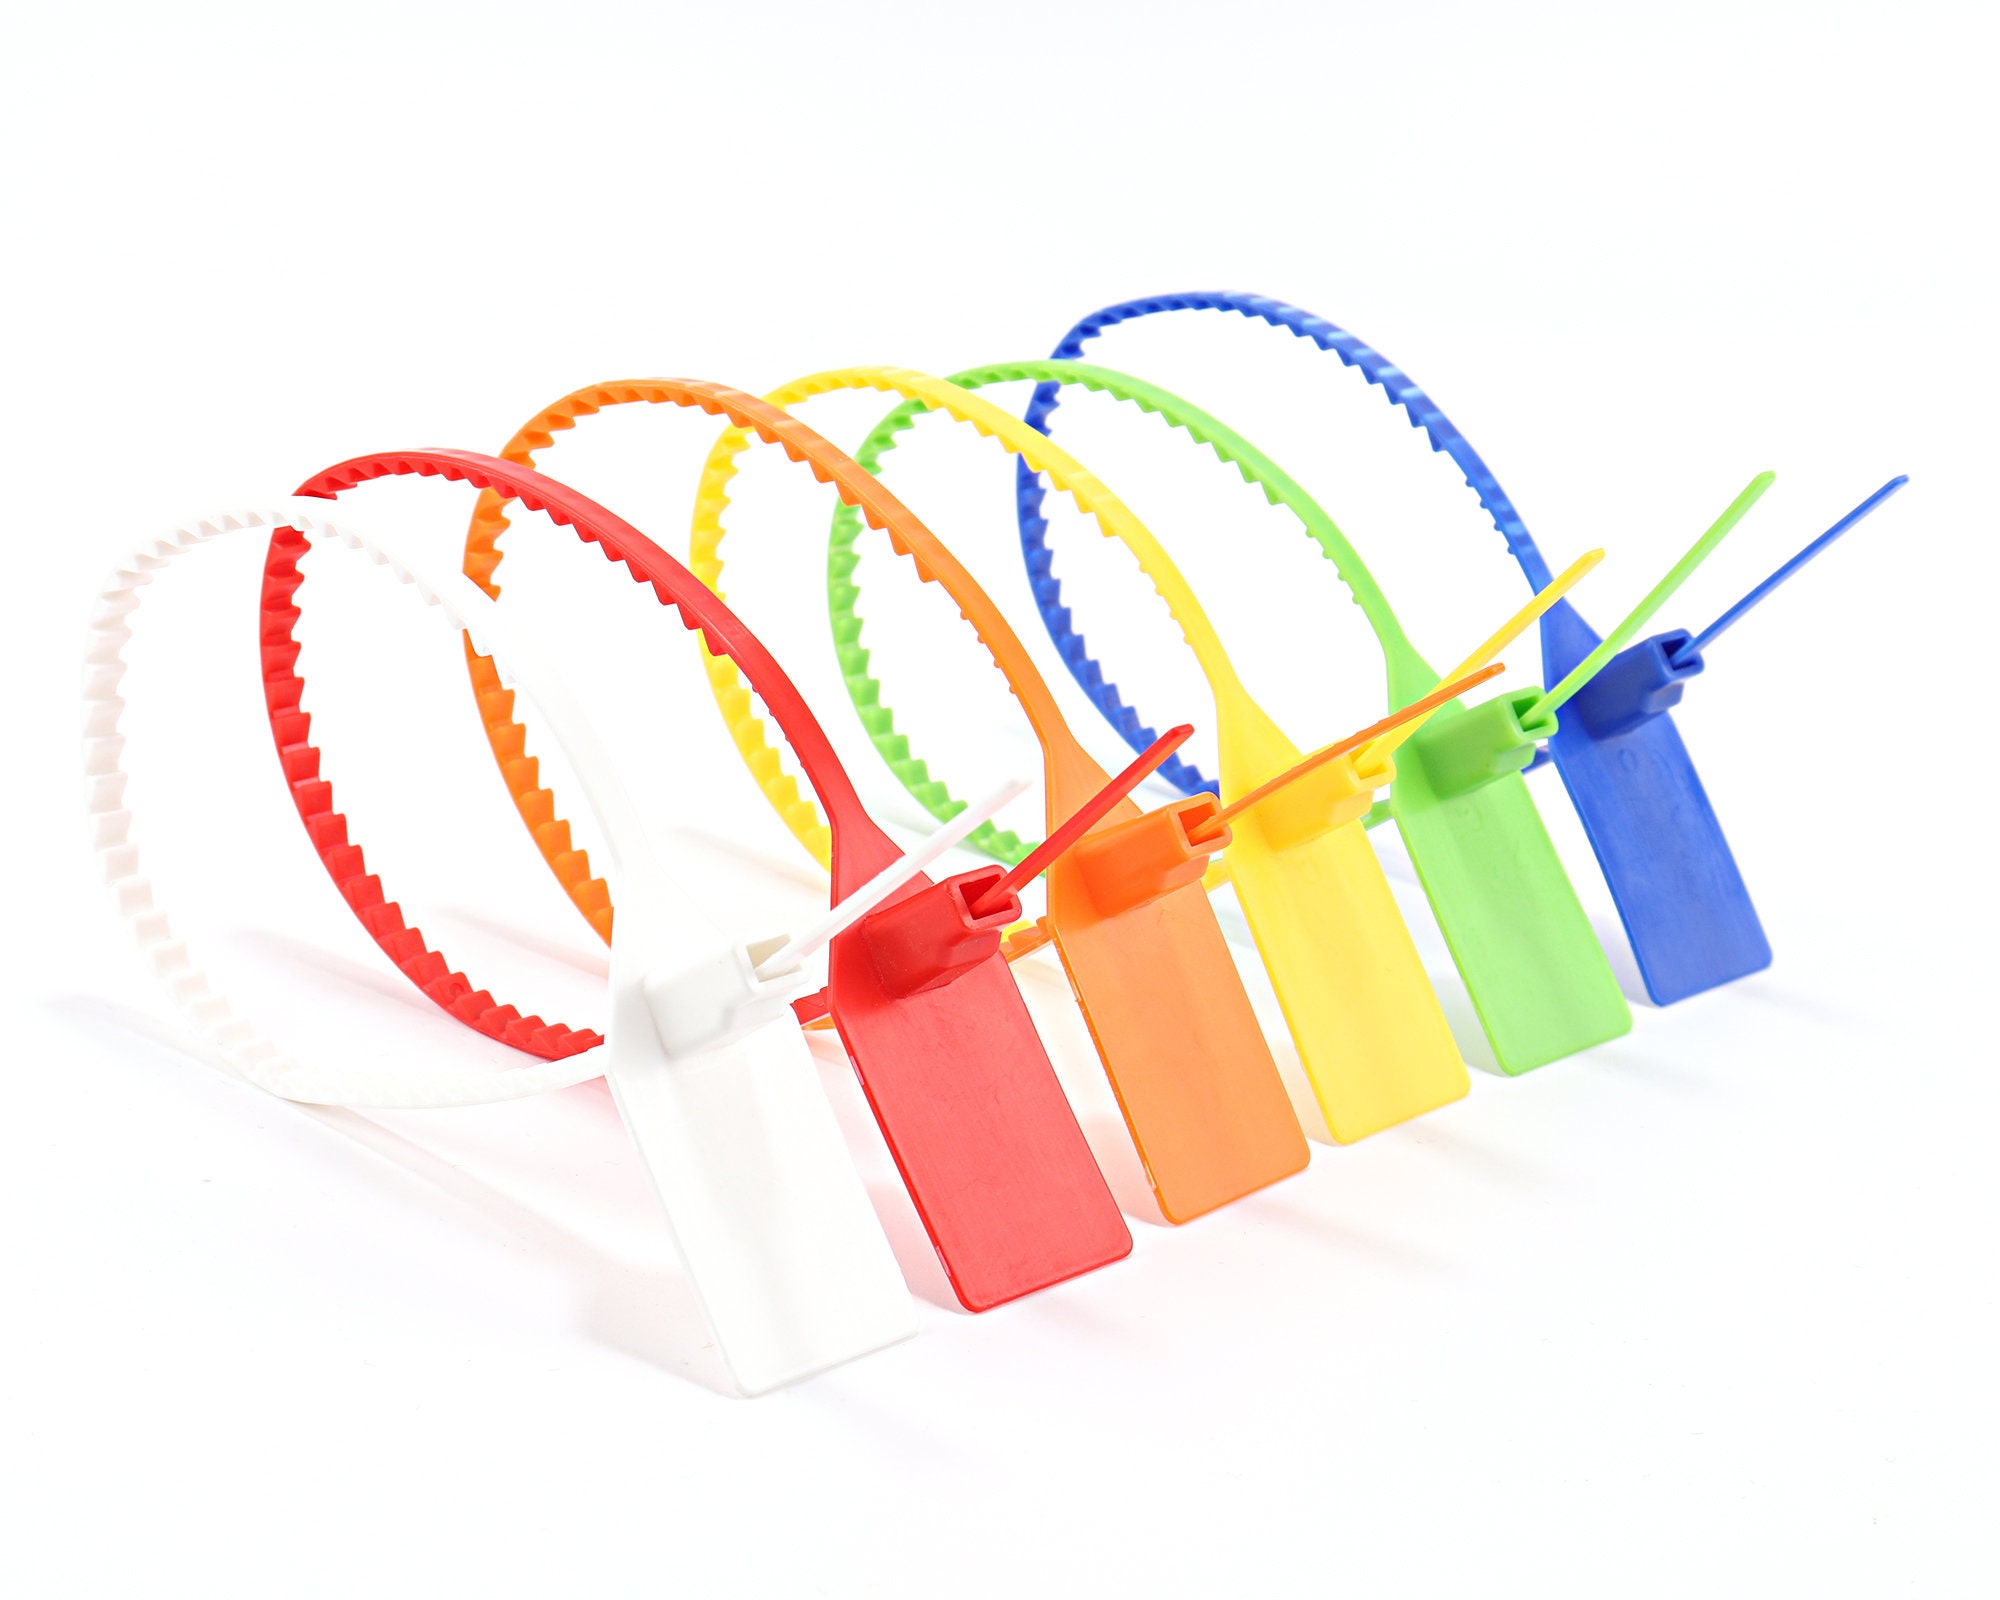 Silicone Zip Ties, Reusable Zip Ties, Rubber Cable Ties Straps for Wire  Management, Elastic Silicone Ties Cable Organizer for Home Office,  Multicolor Cord Ties in Two Sizes 4.5\\ 